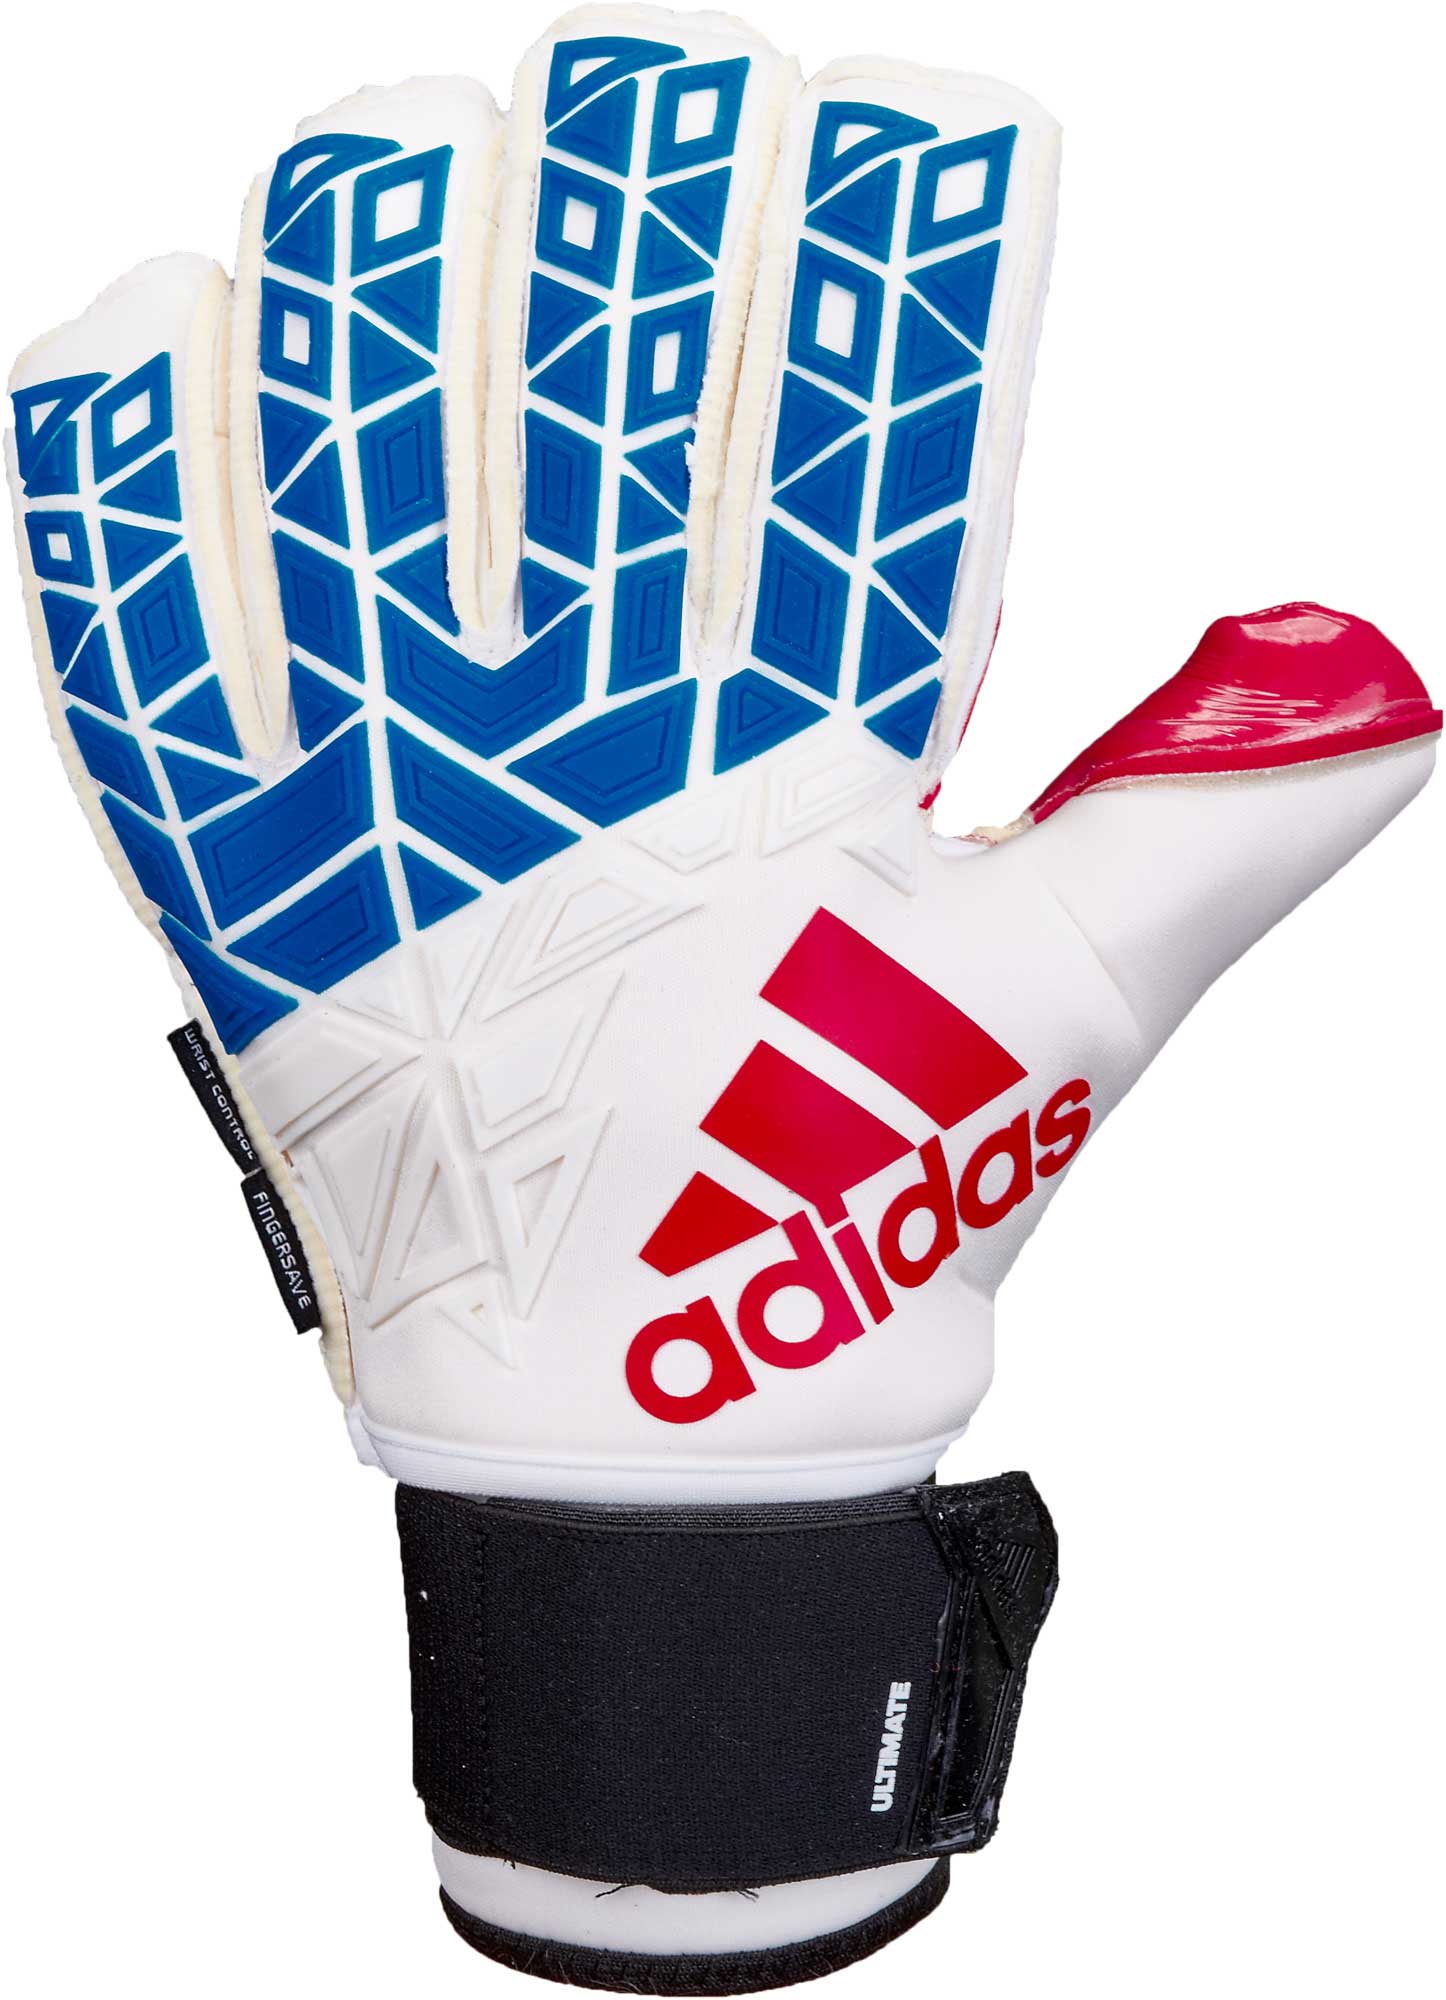 adidas ace keeper gloves